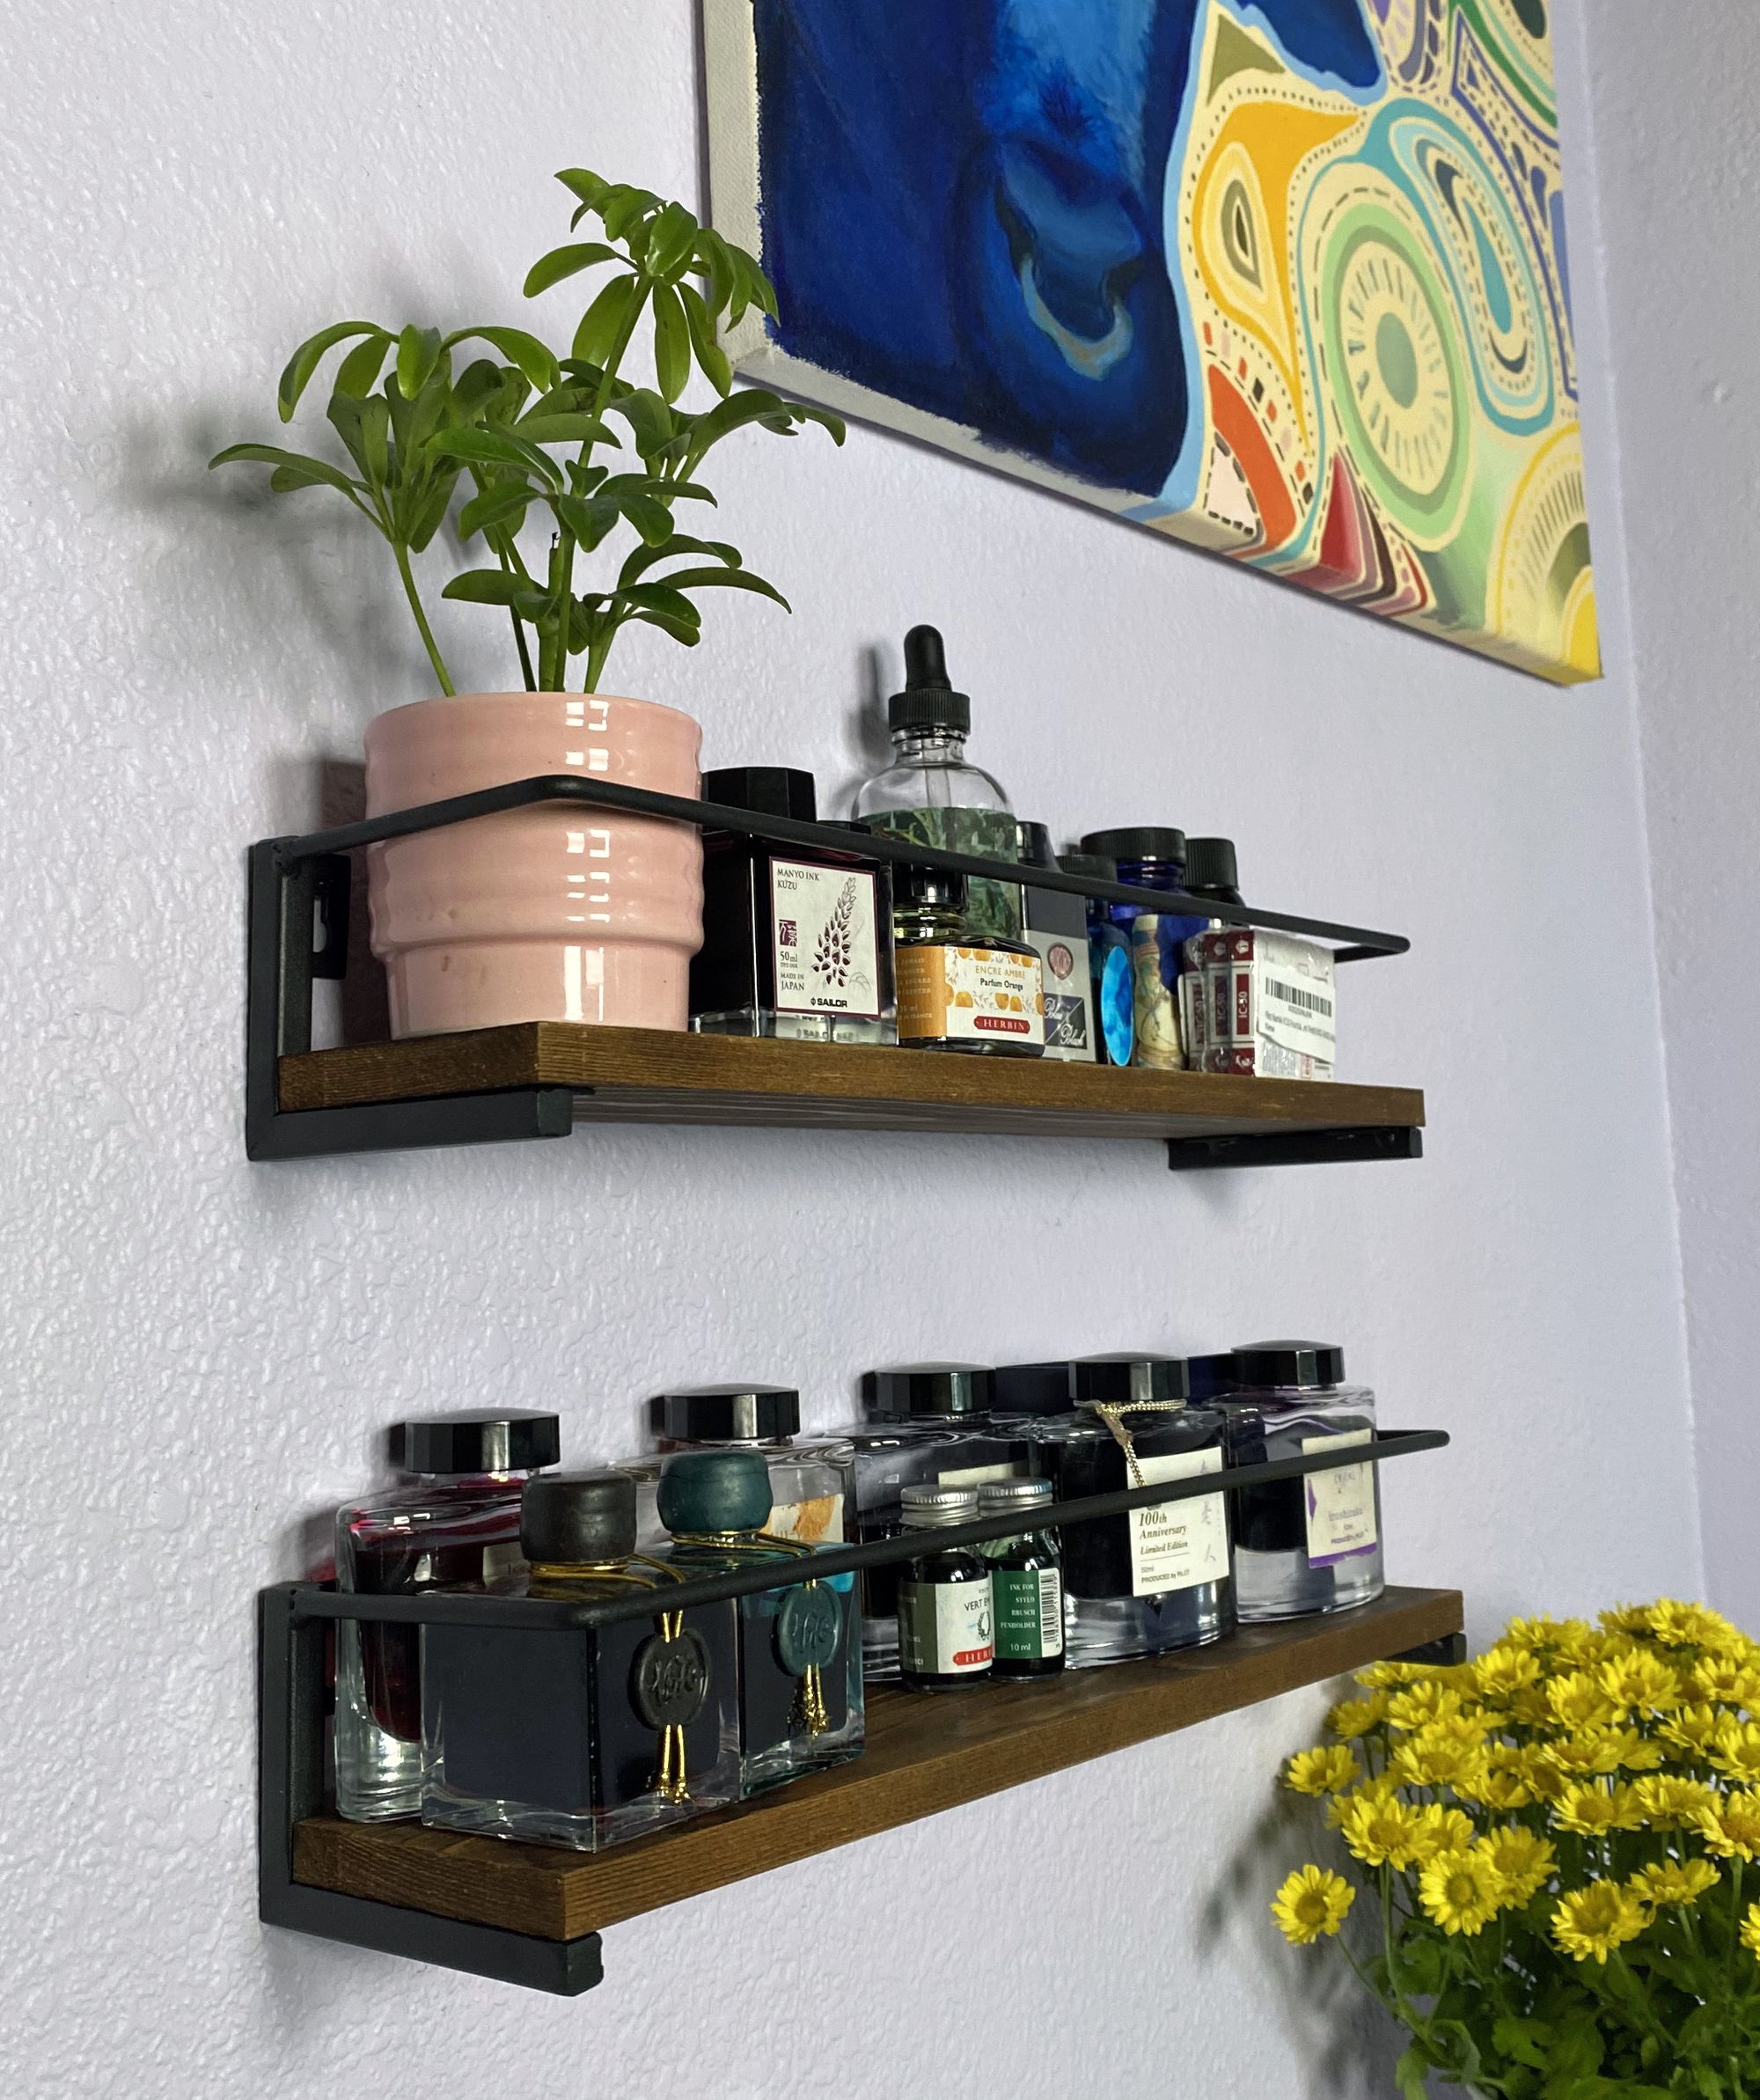 A left side view of the 2 spice racks being used to hold ink bottles and a potted plant.